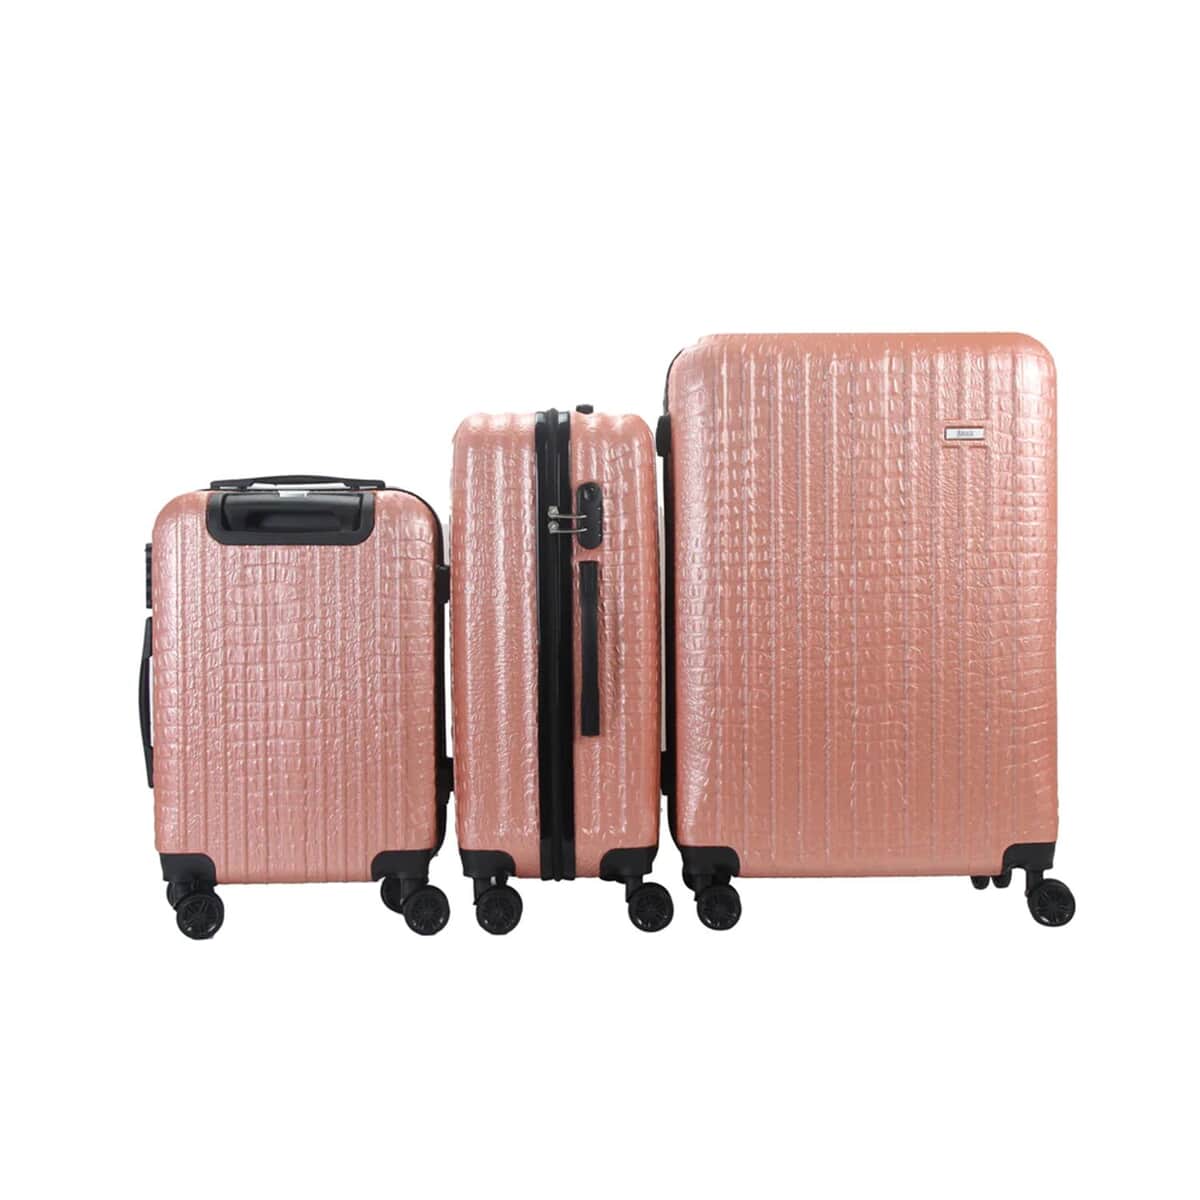 Mirage- Eileen 3 Piece Rose Gold Crocodile Embossed Luggage Set with Dual Spinning Wheels and Combo Lock (28, 24, 20) image number 0